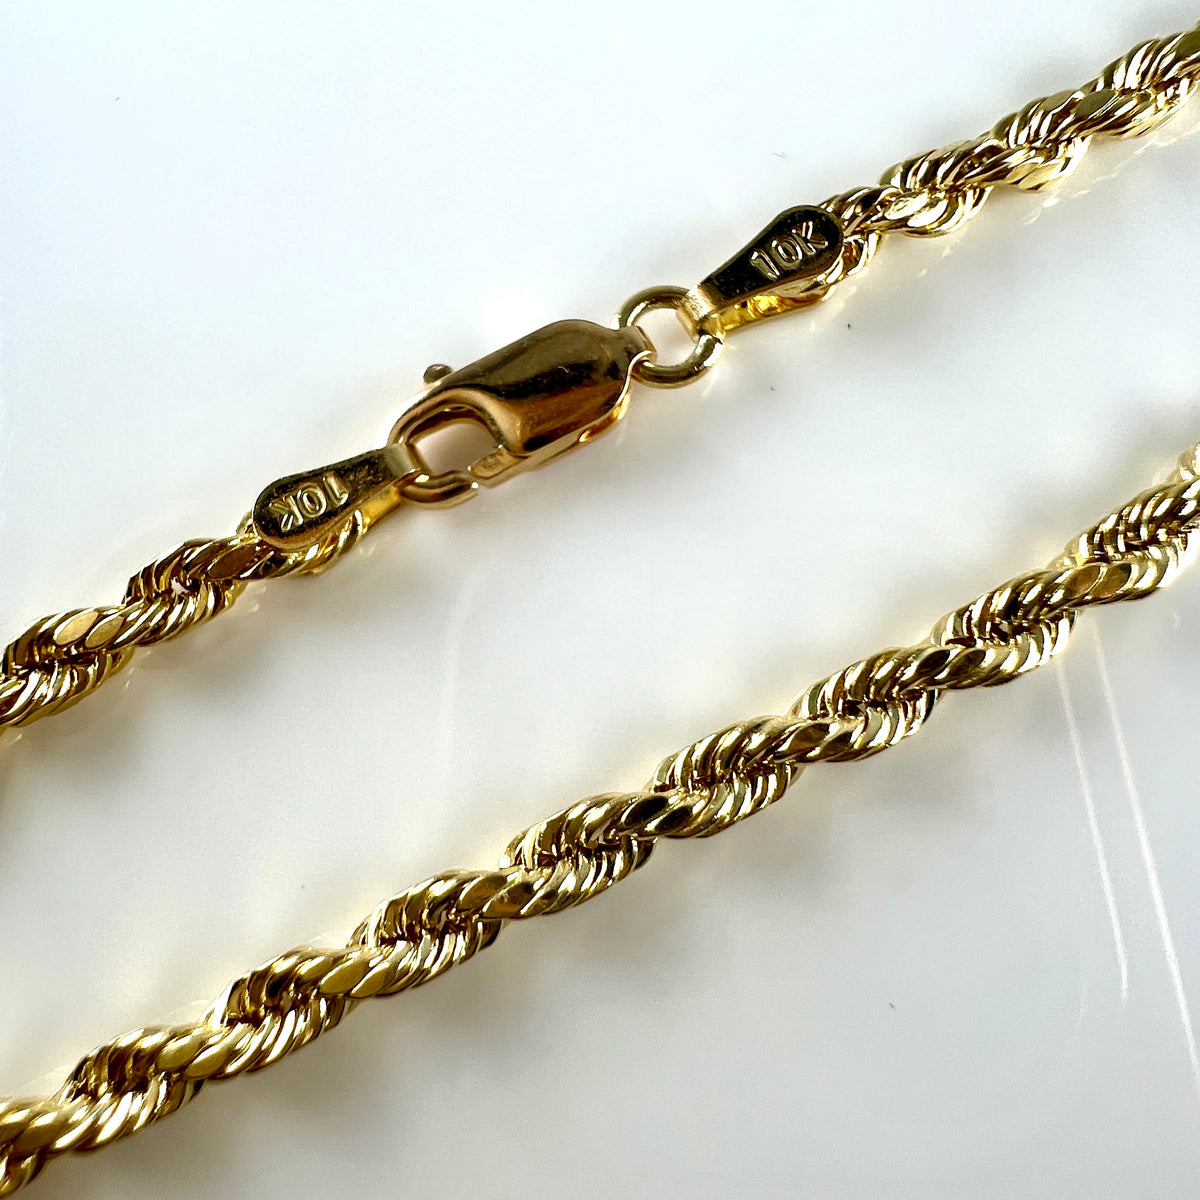 10K Yellow Gold 7” Rope Chain Link Bracelet